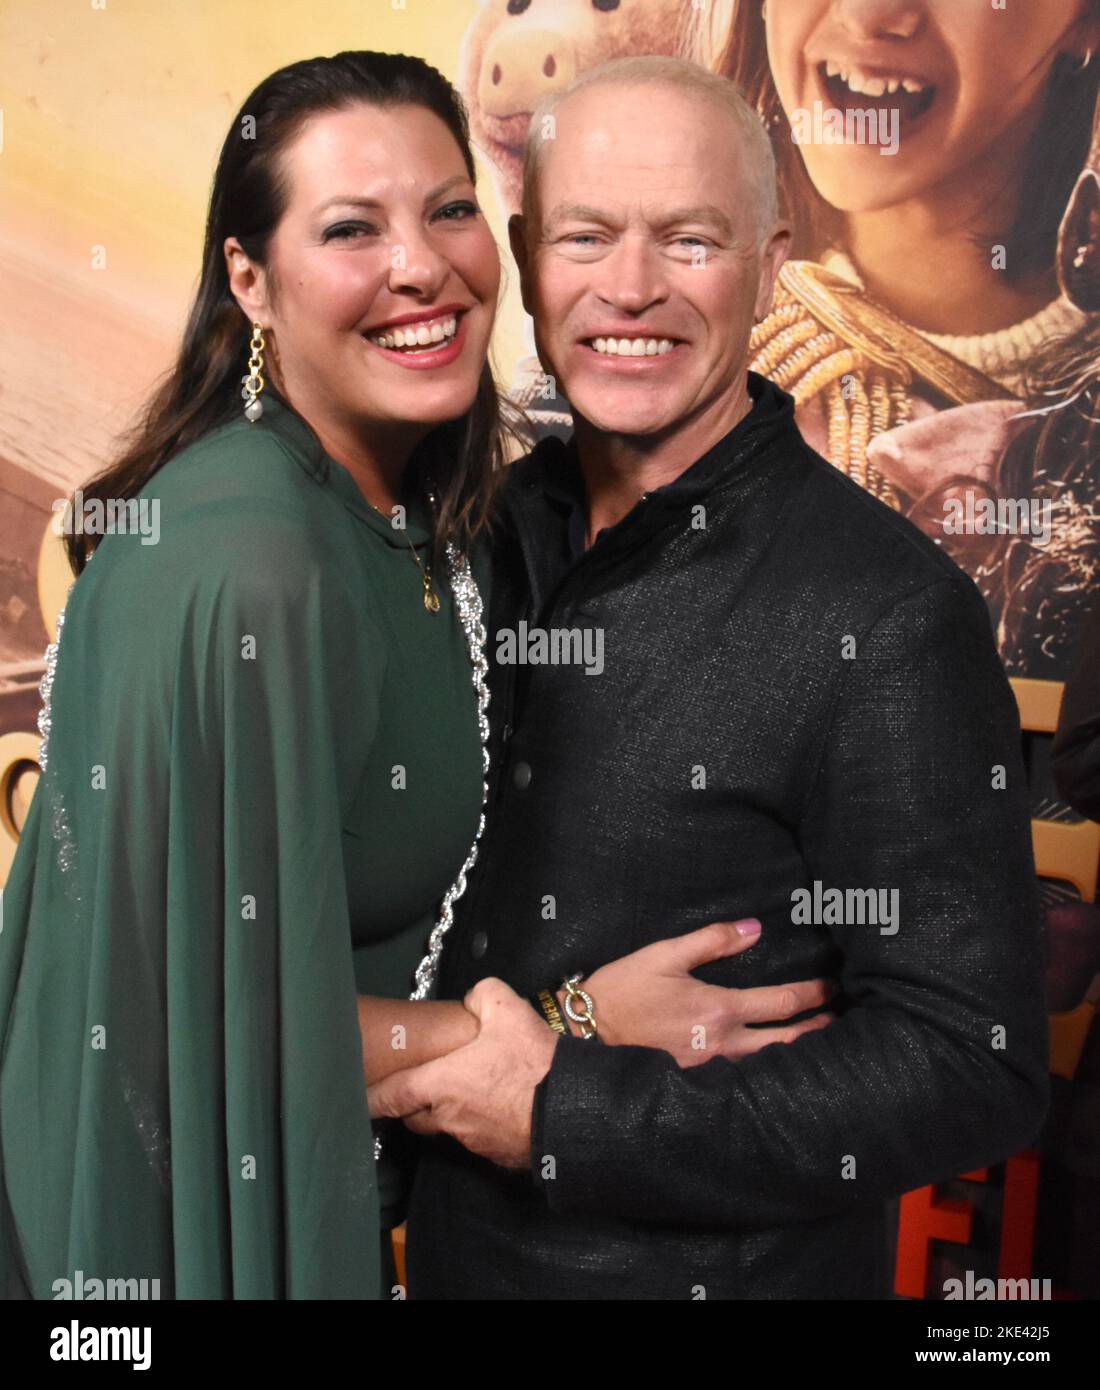 LOS ANGELES, CA. July 19, 2011: Neal McDonough & wife Ruve